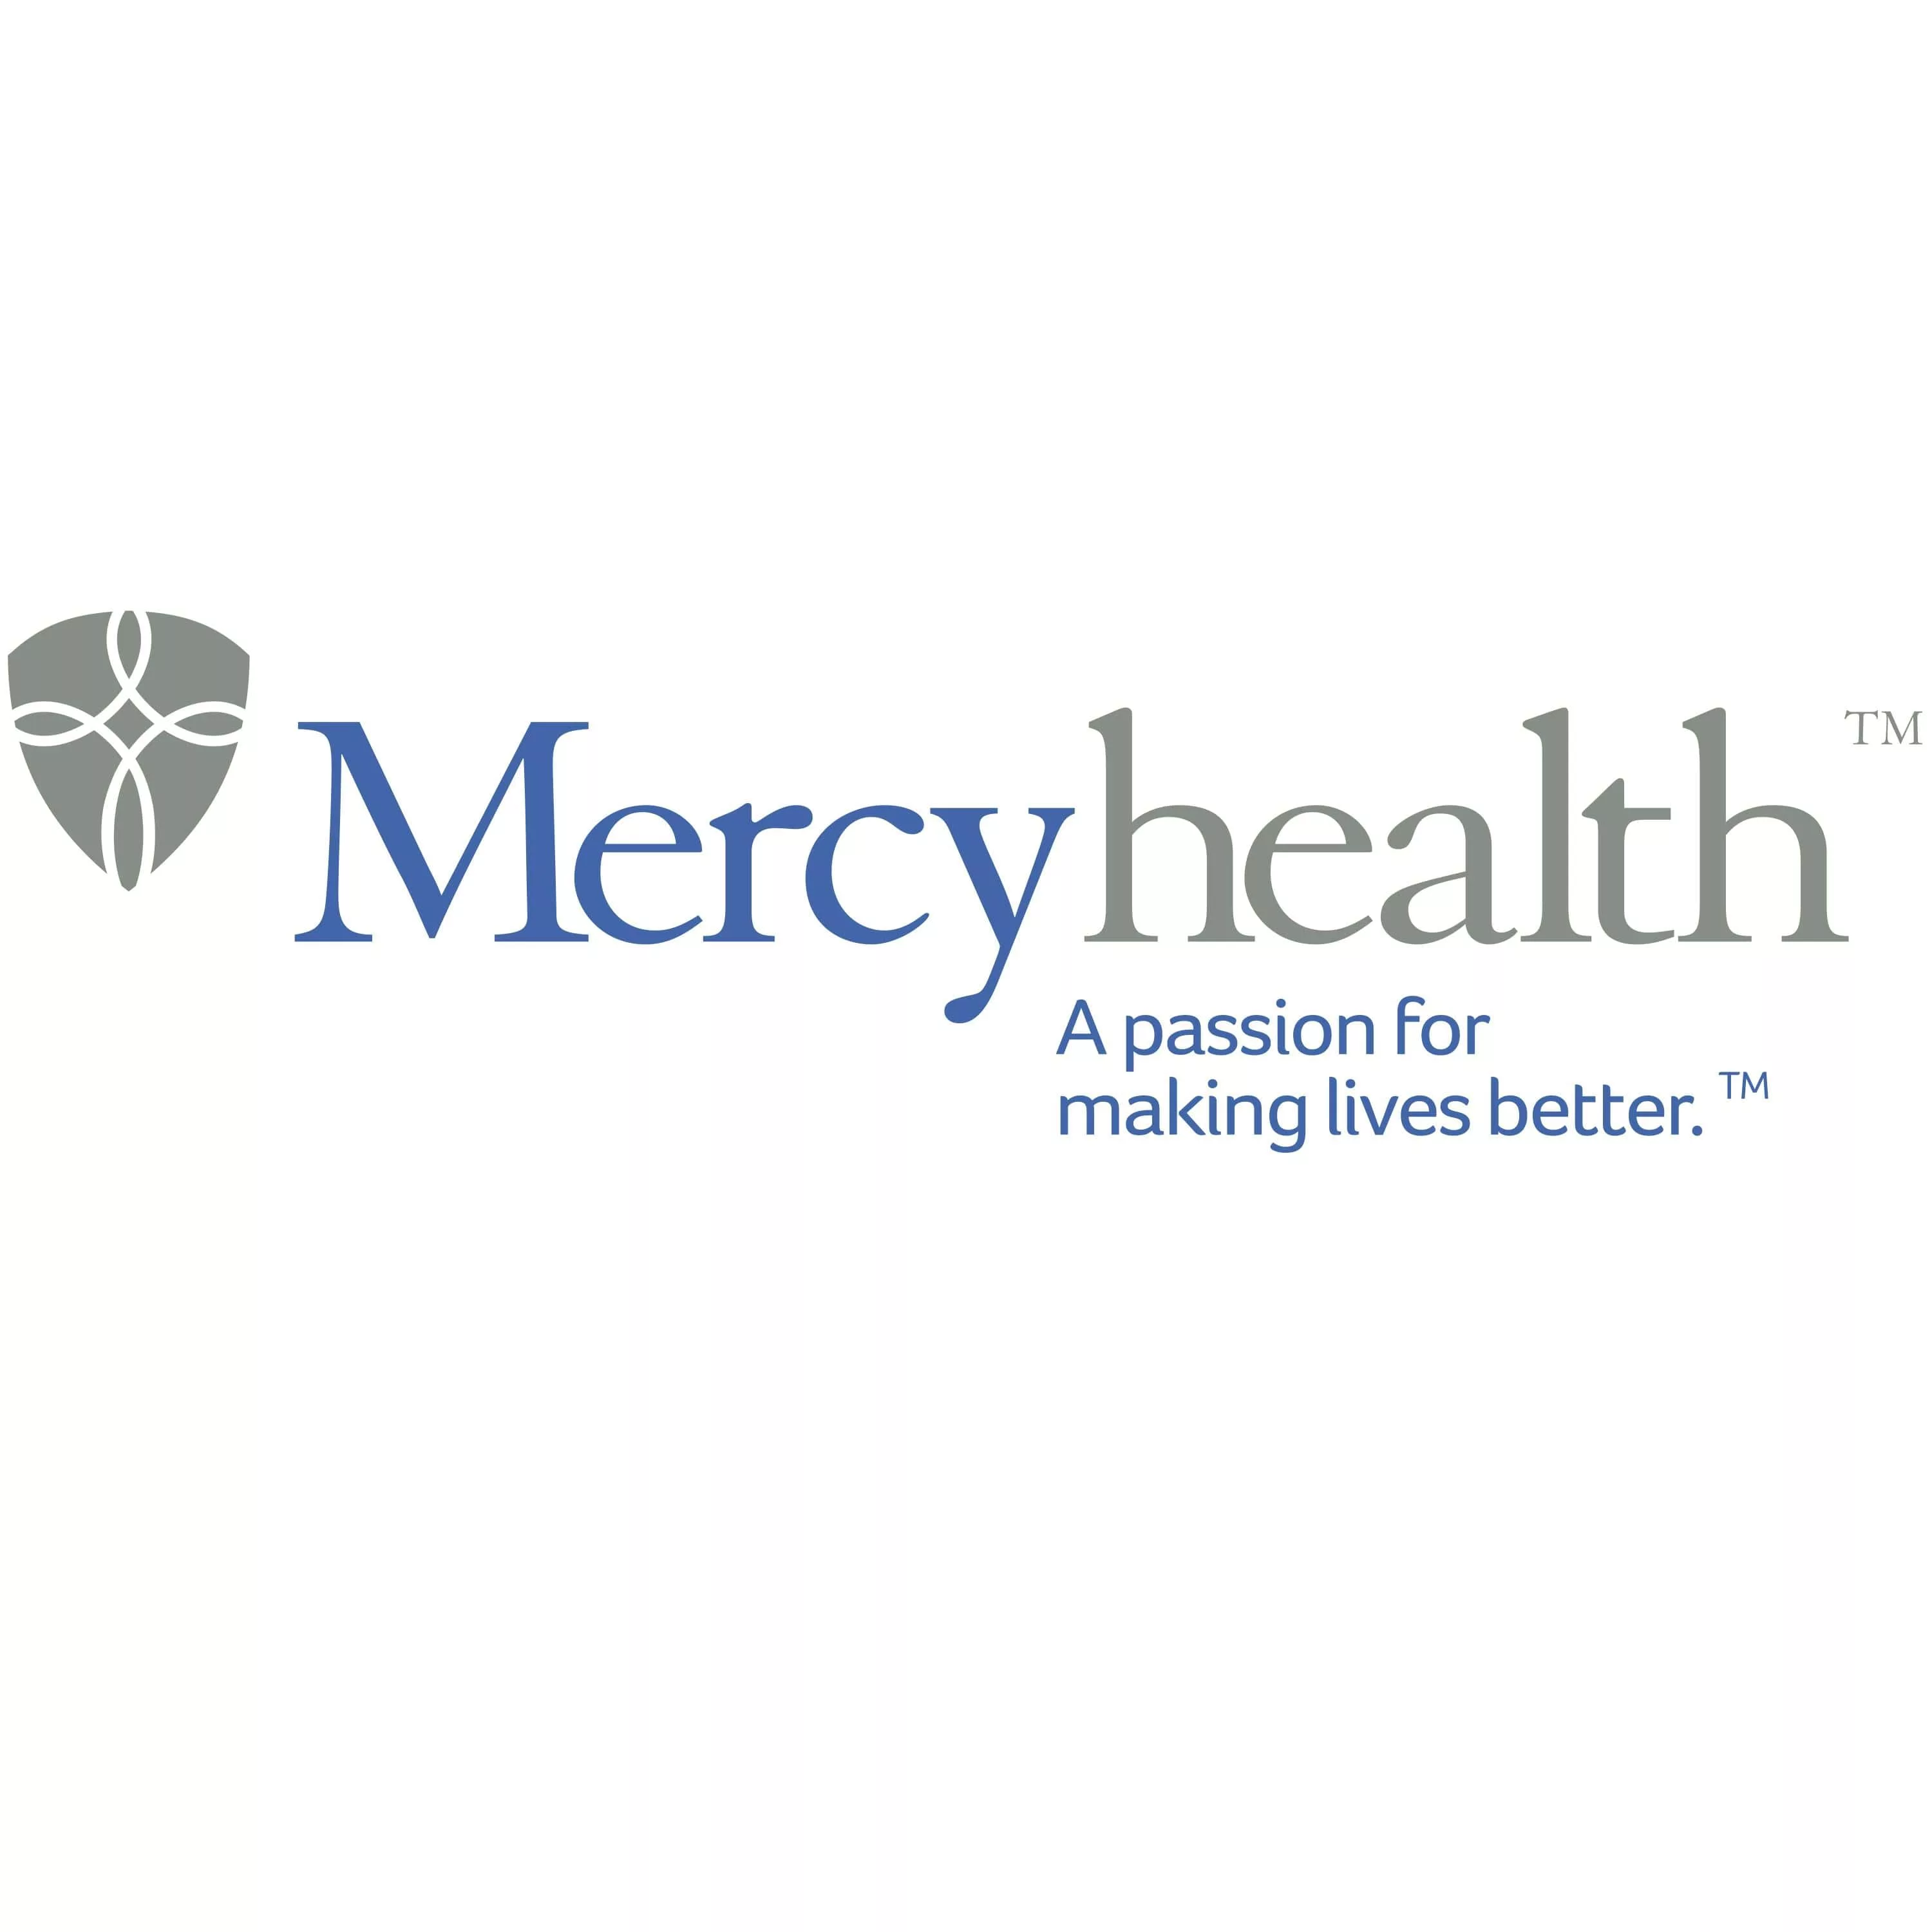 Mercyhealth cuts ribbon on new Kidney Care and Dialysis Center | WWHG ...